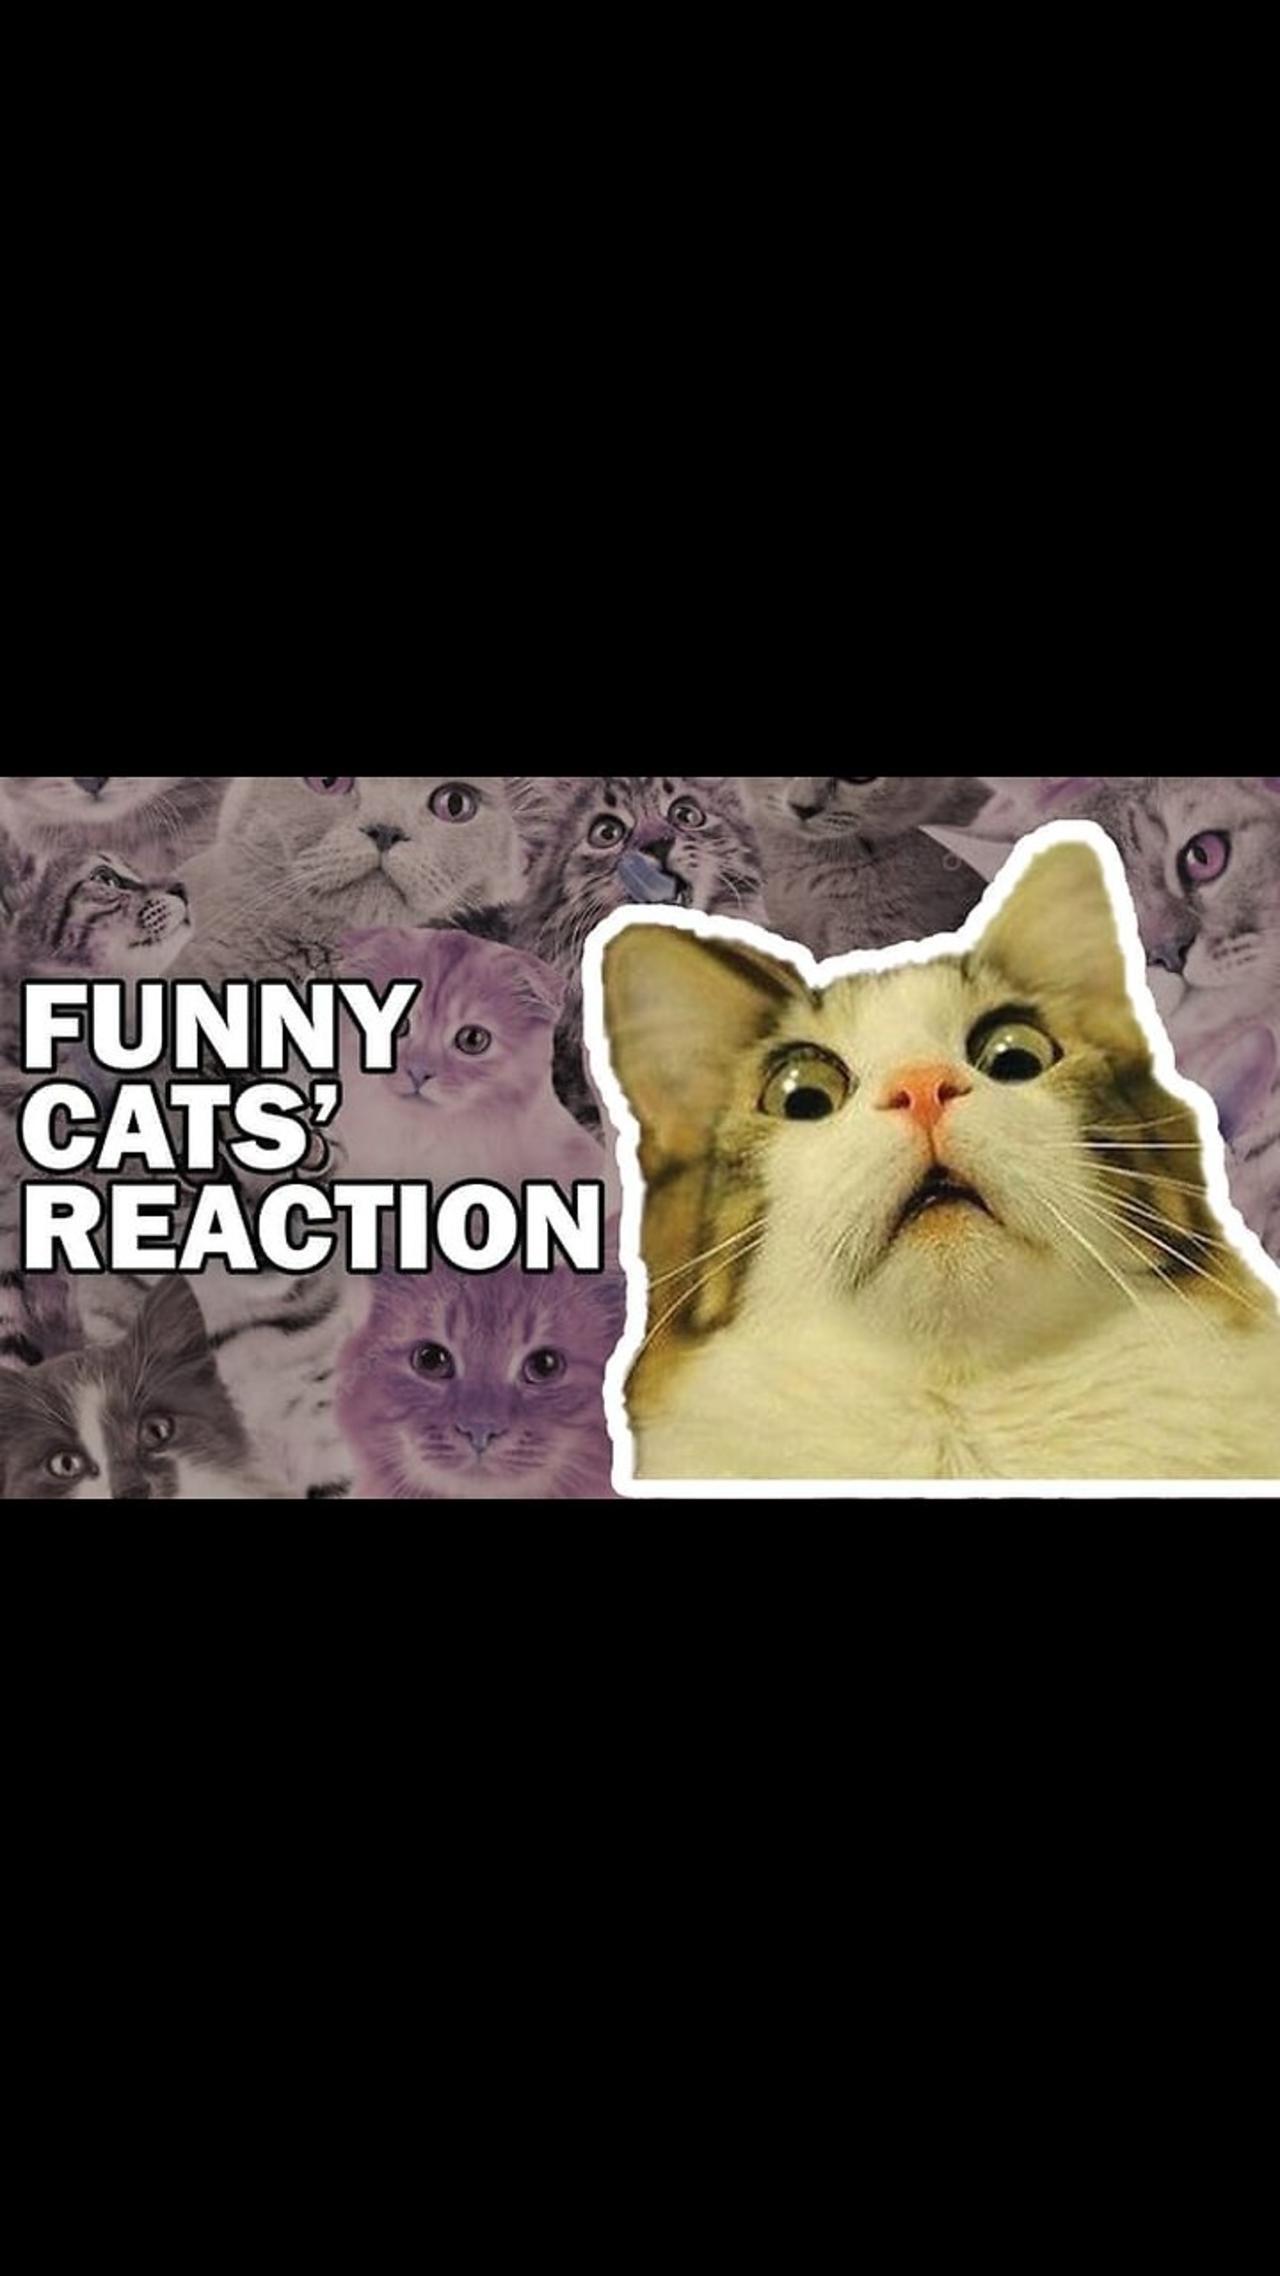 Cats reaction for living 🤣